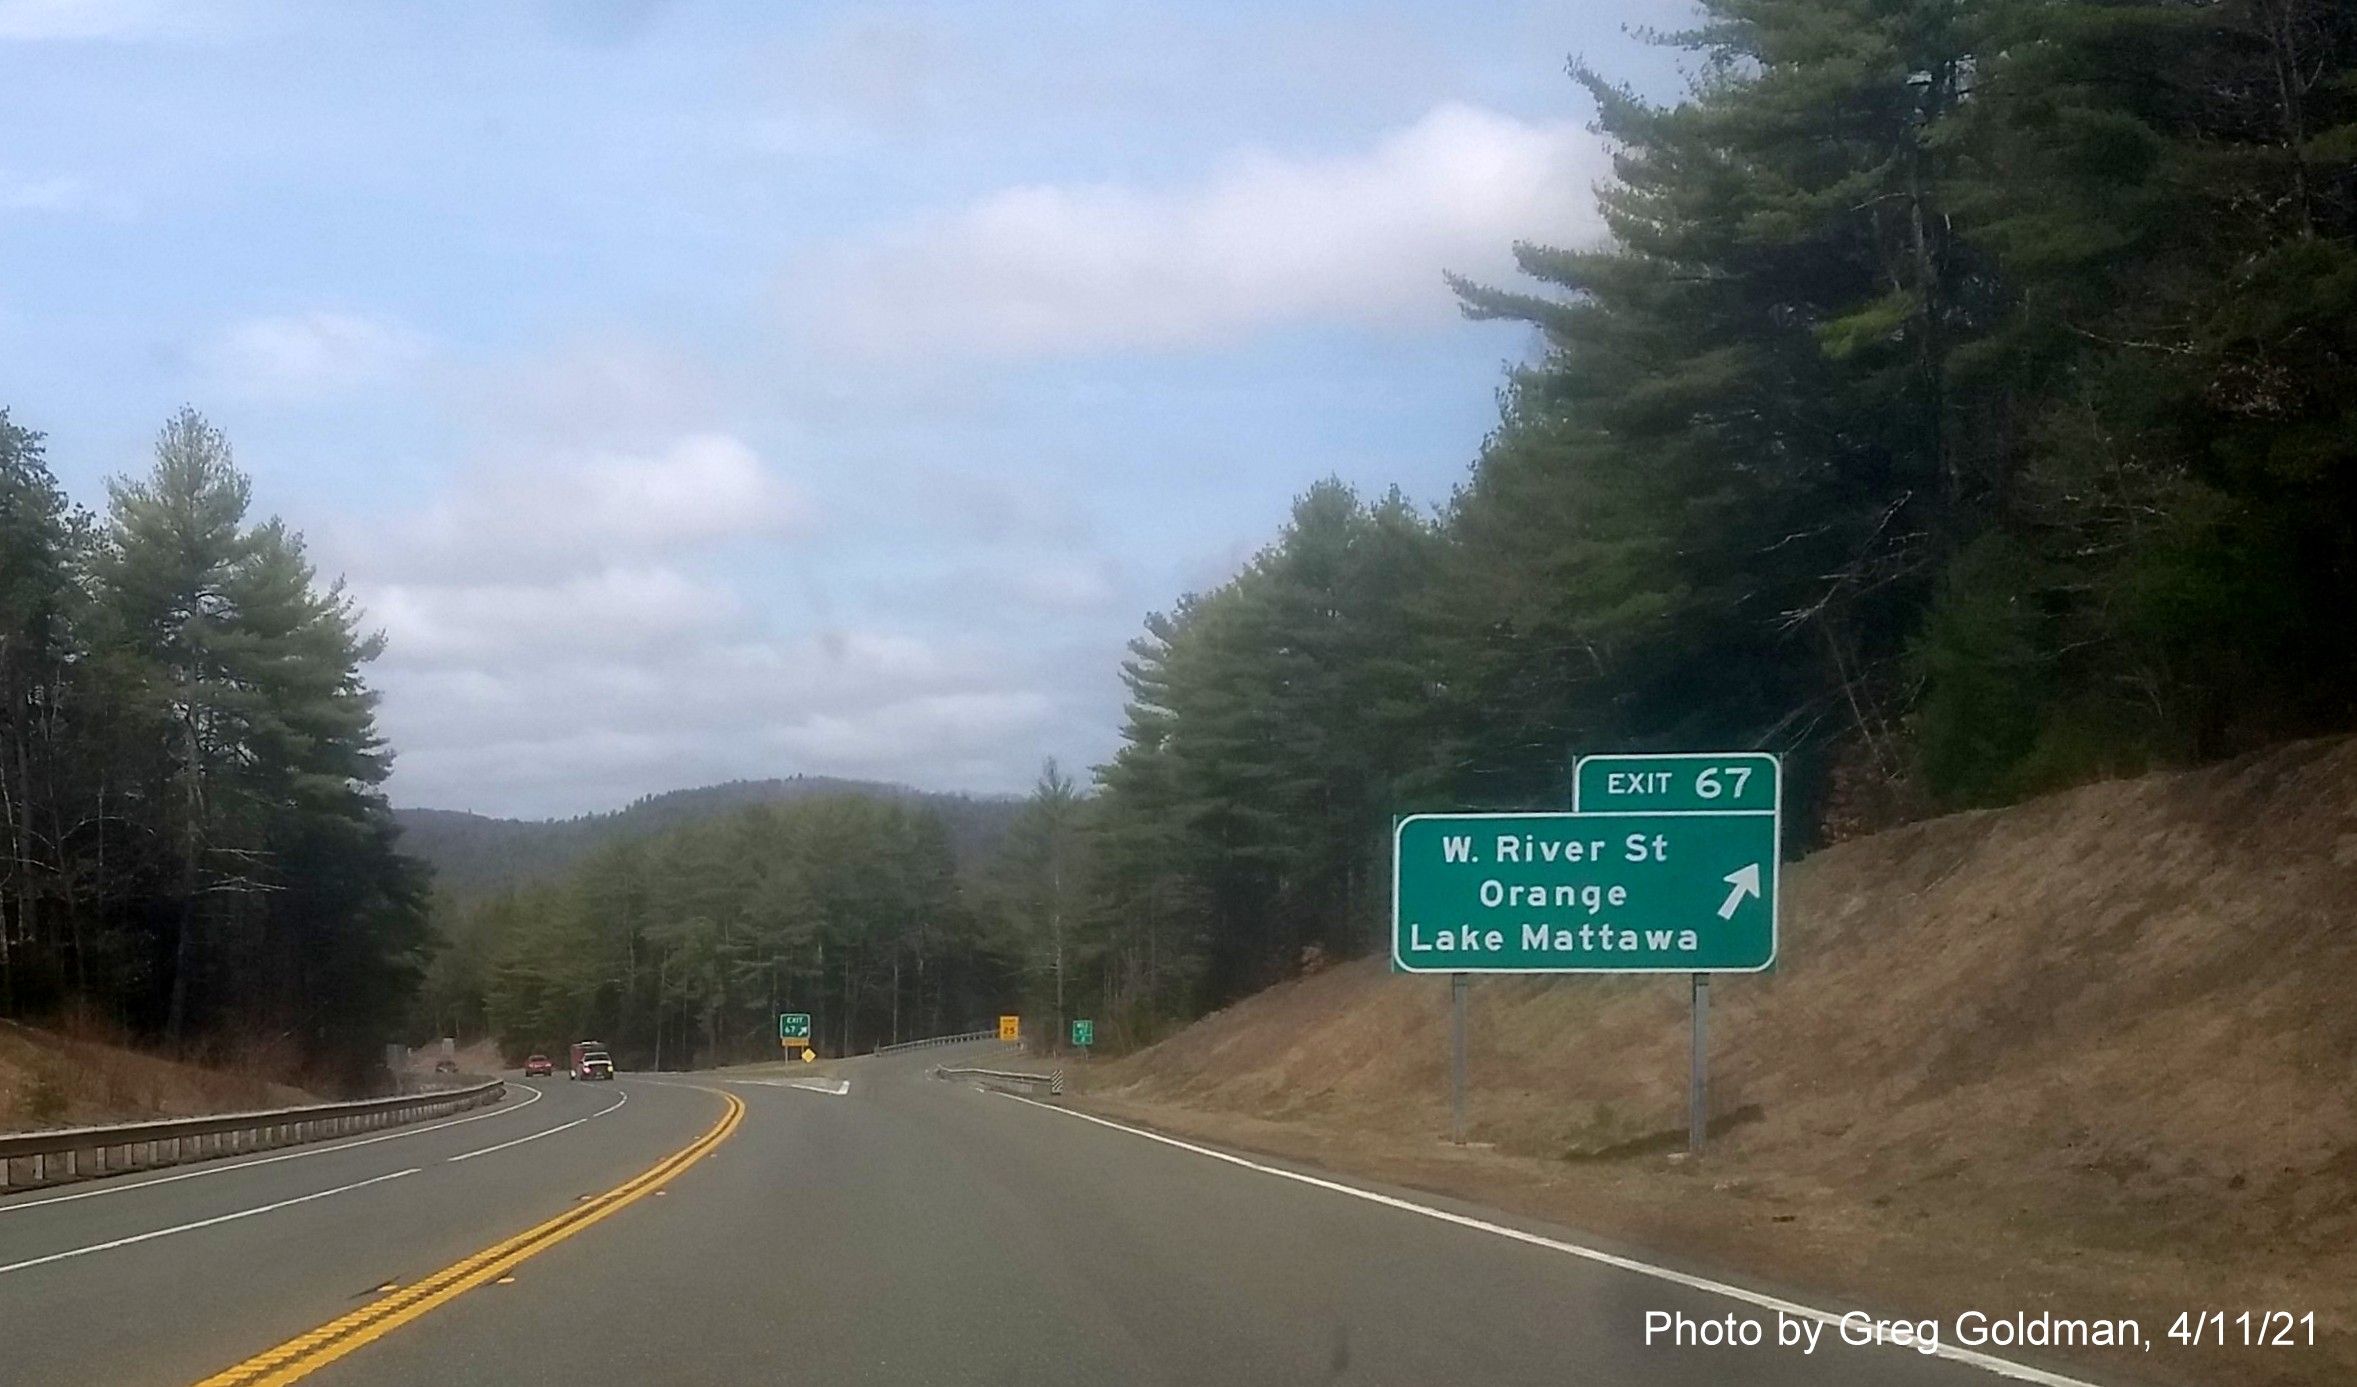 Image of ramp sign for West River Street exit with new milepost based exit number on MA 2 West in Orange, by Greg Goldman, April 2021